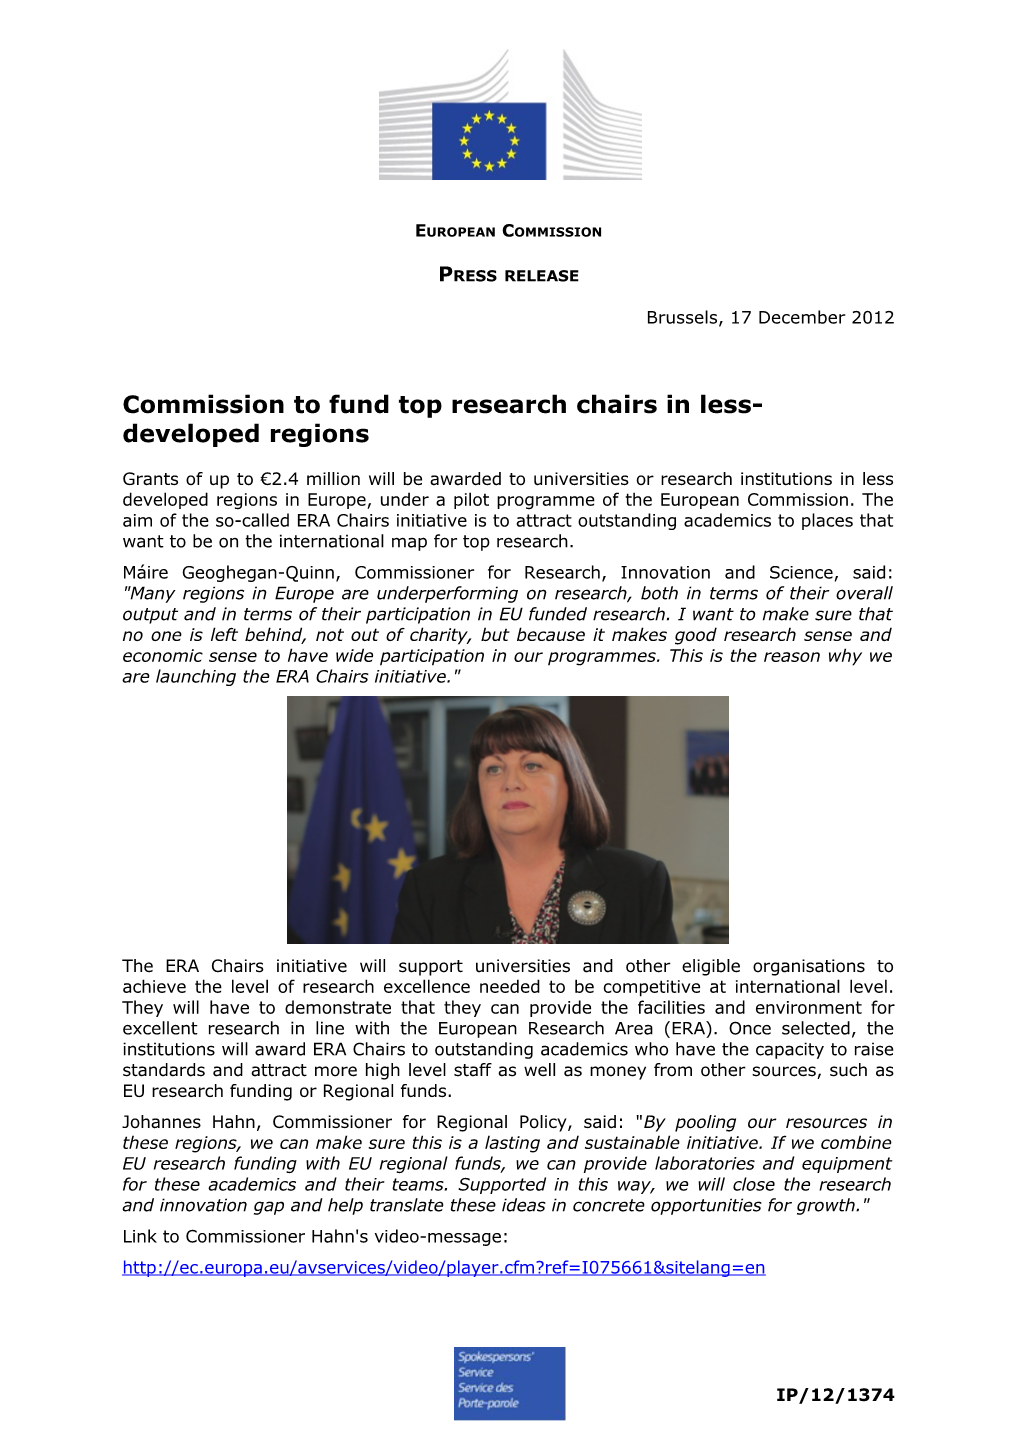 Commission to Fund Top Research Chairs in Less-Developed Regions